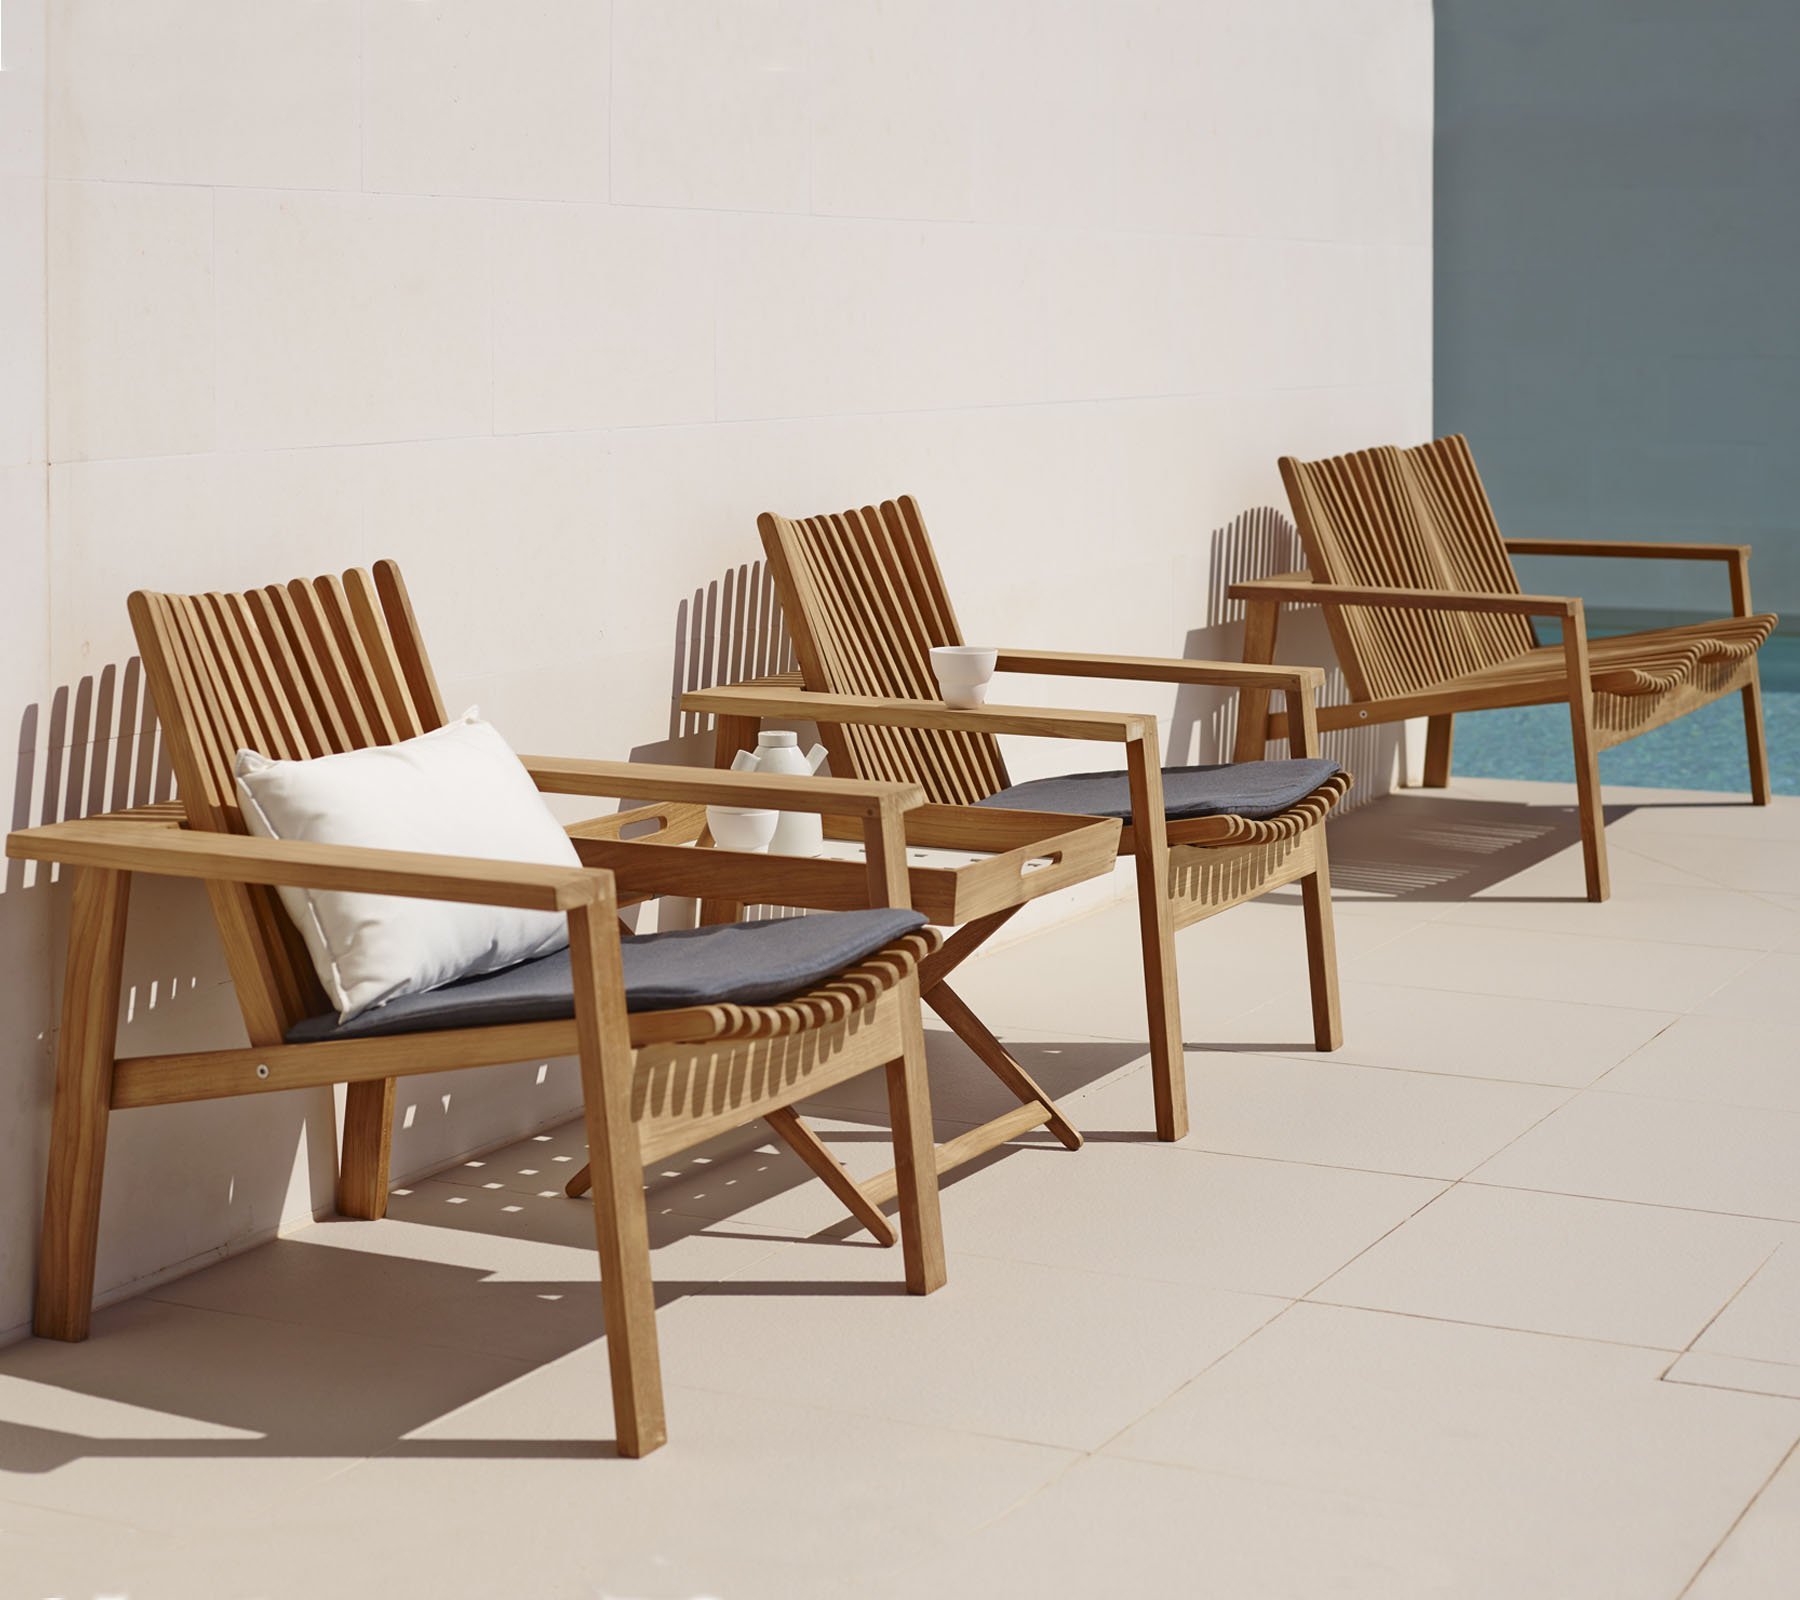 Cane-line Amaze Lounge Chair | Wooden | Outdoor-Patio Furniture - Ultra ...
